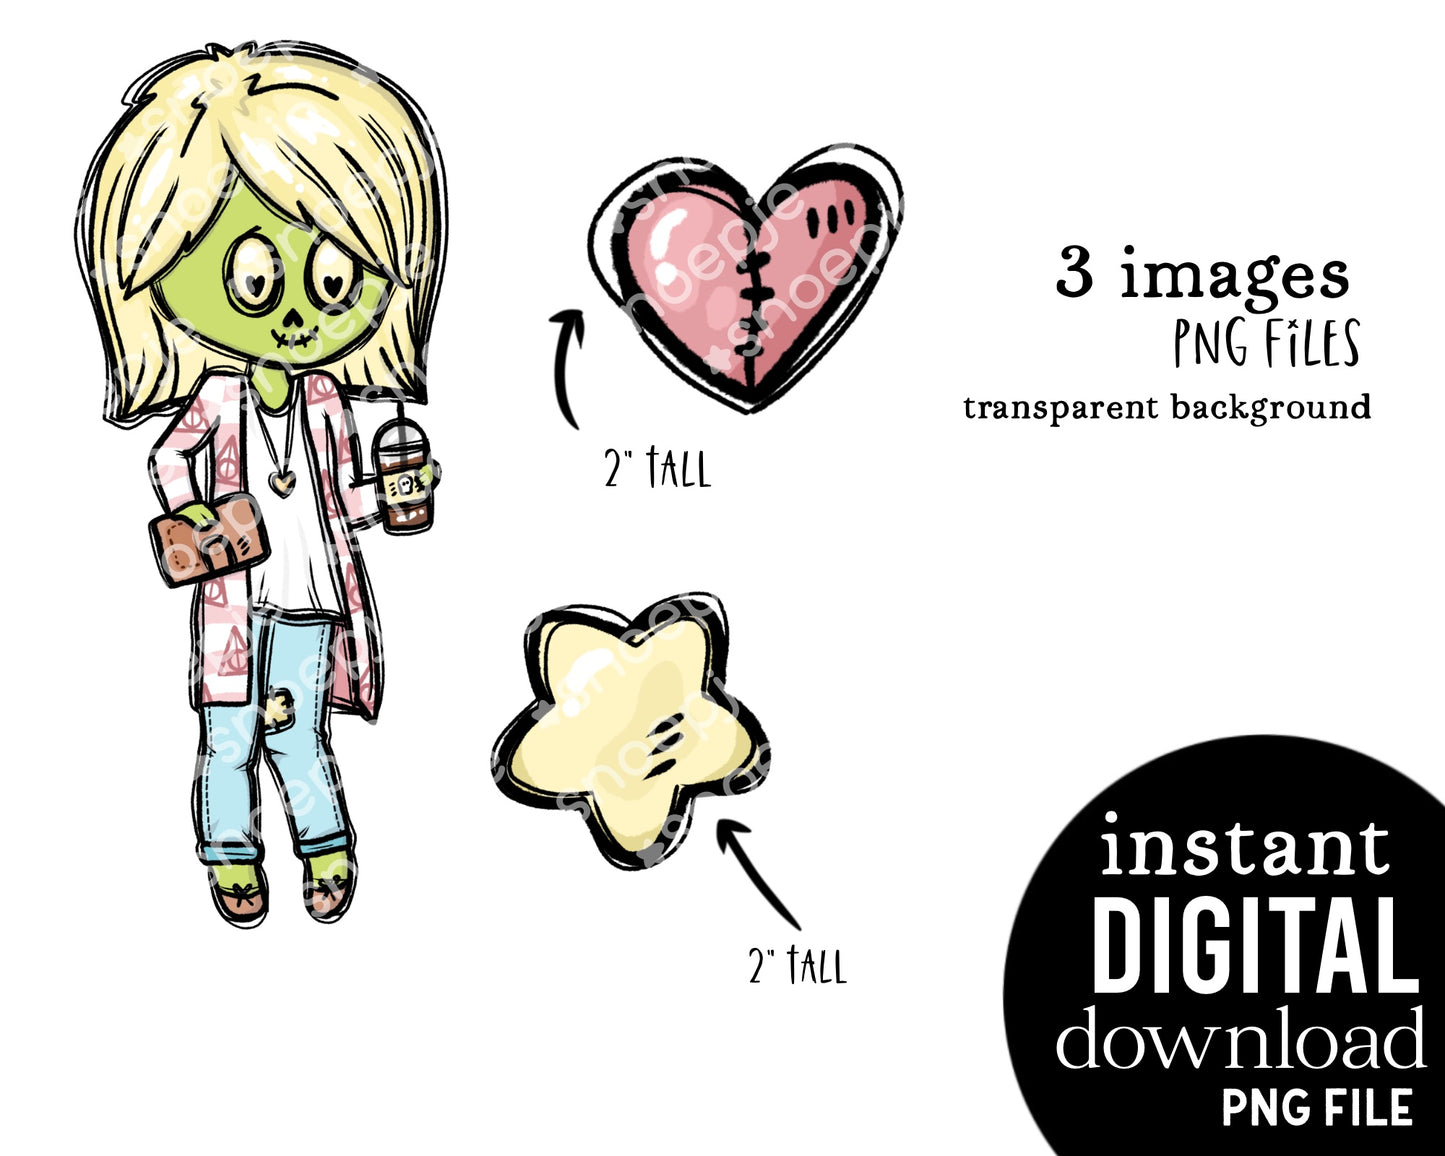 Coffee Zombie Planner Girl Clipart Bundle